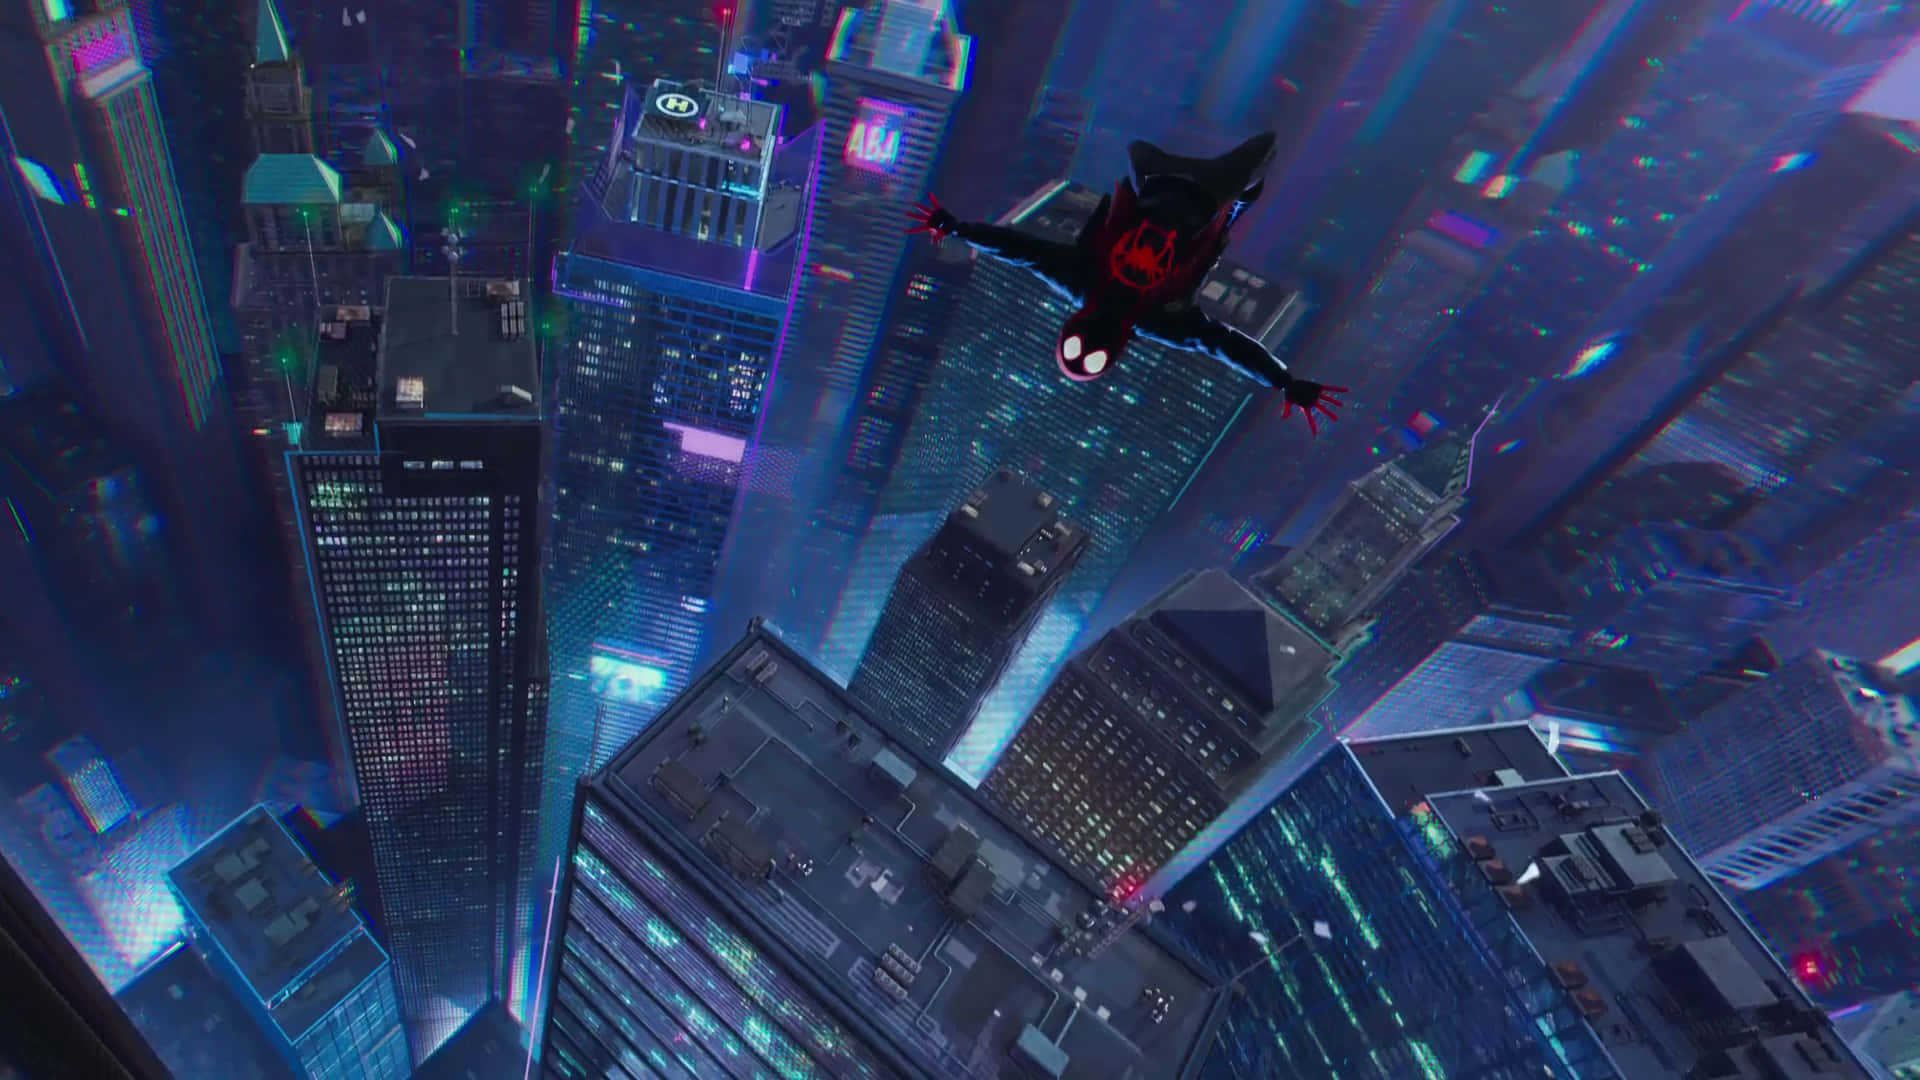 Experience a web-slinging adventure in 4K with Spider-Man: Into the Spider-Verse! Wallpaper